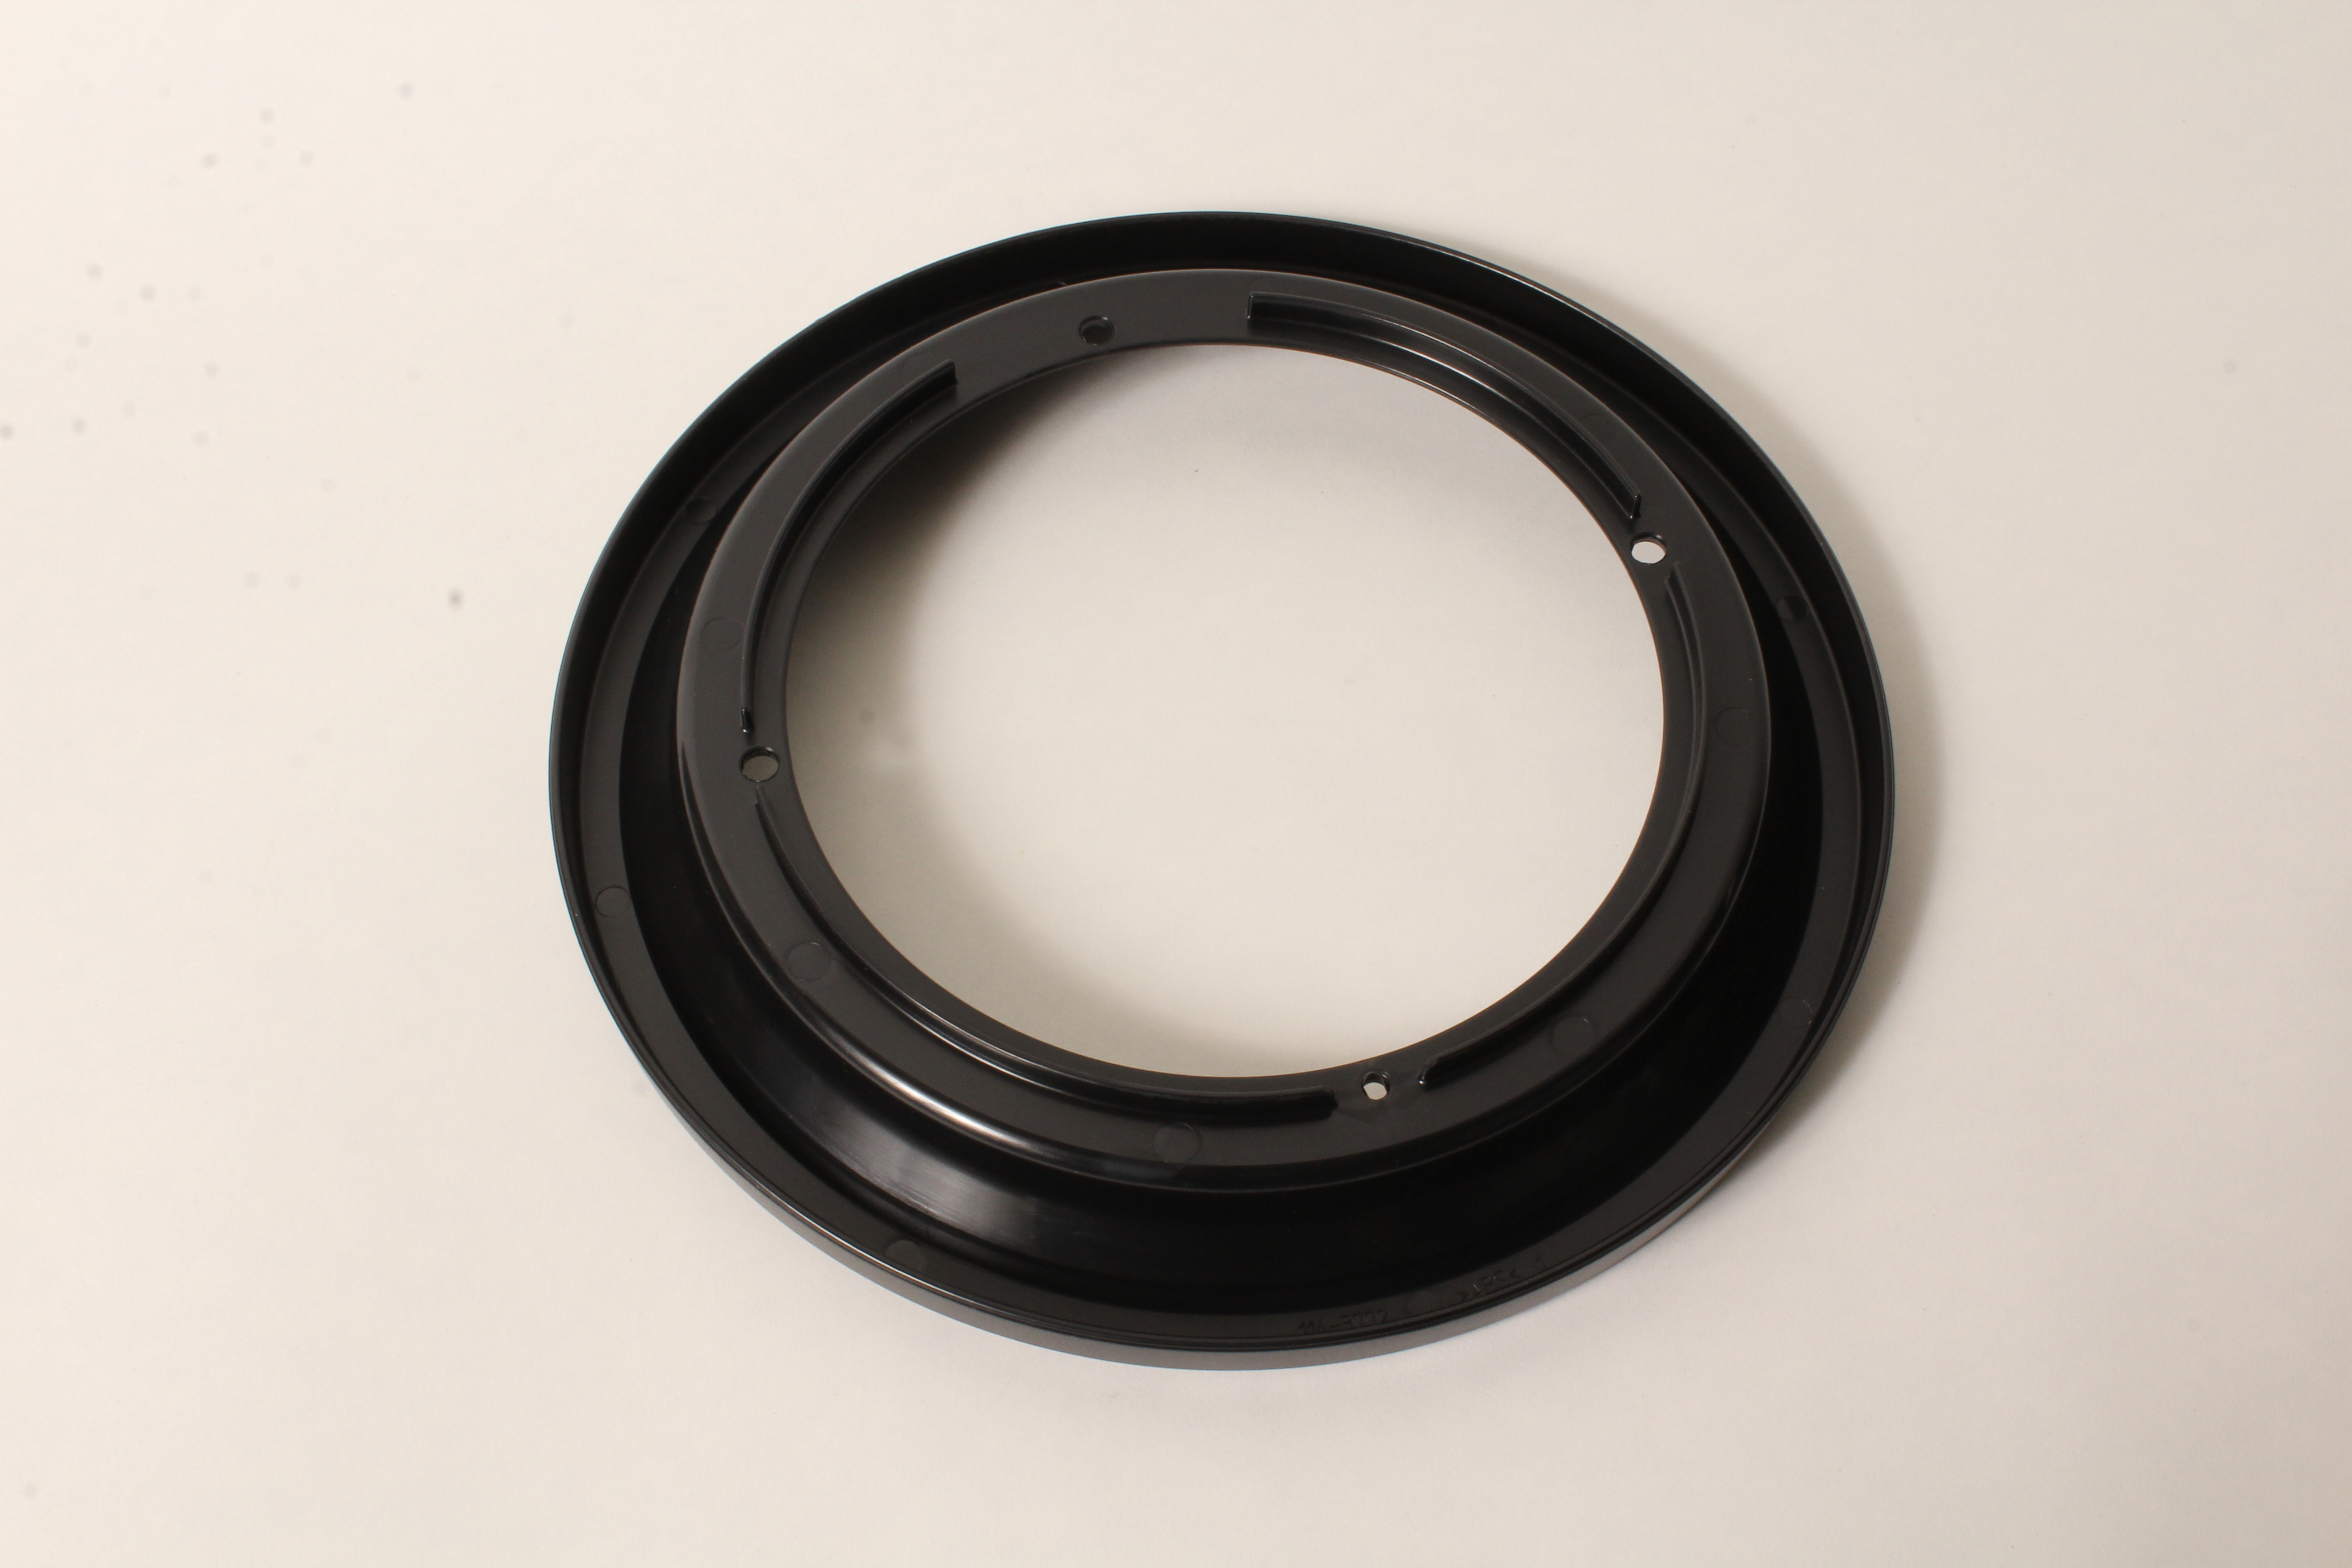 Toro OEM Toro 114-3772 Chute Ring Seal For Select Power Clear Quick Clear Snow Blower